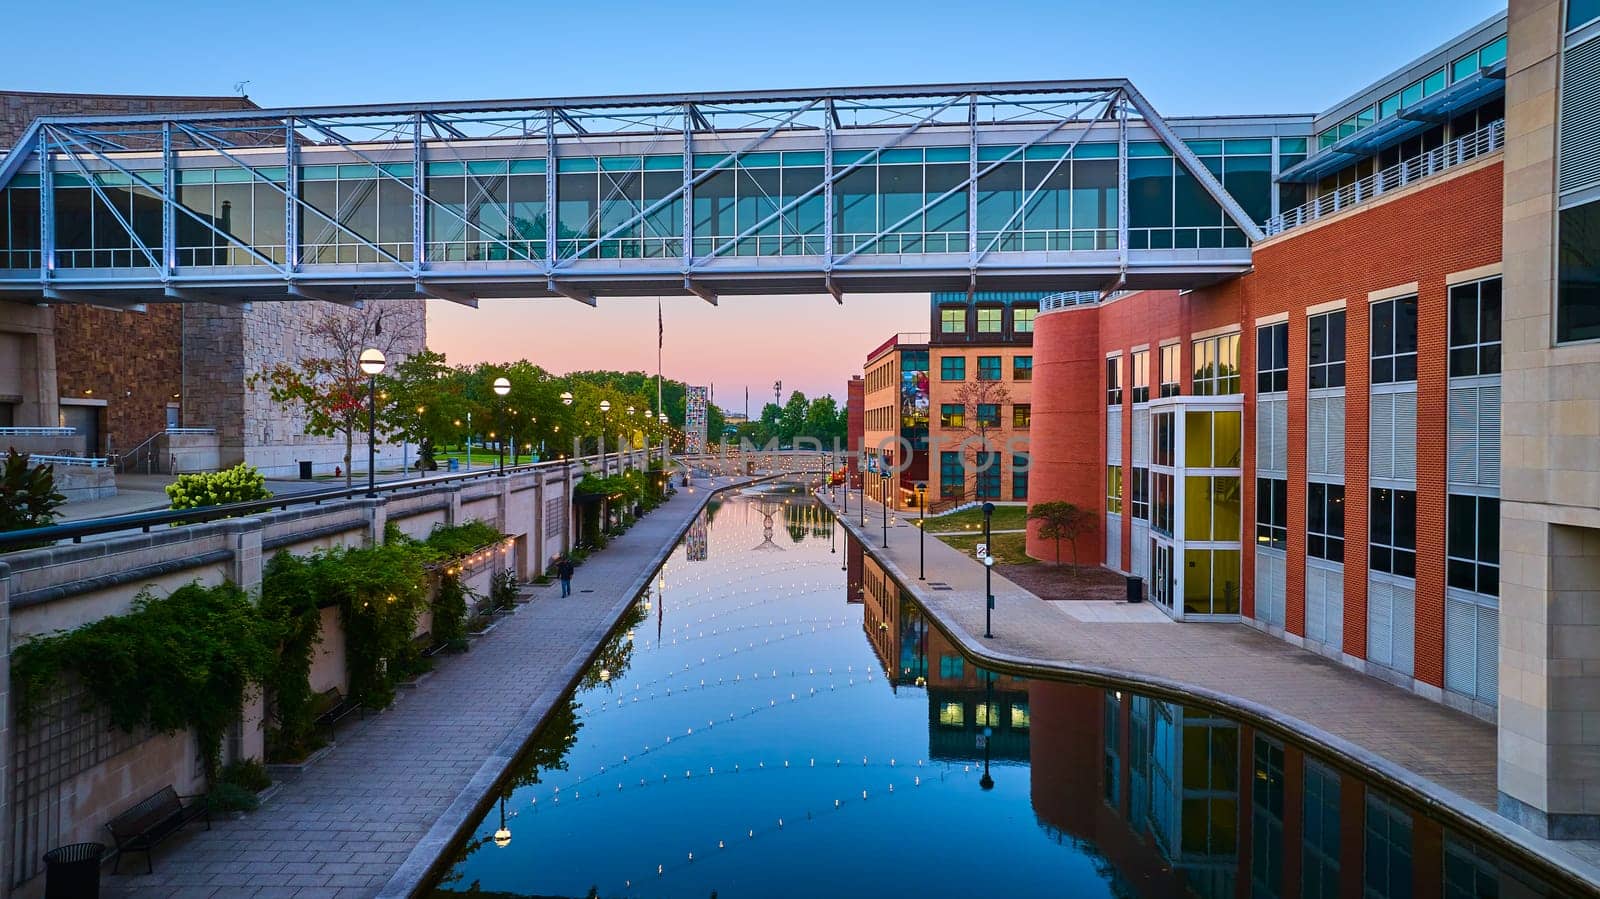 Twilight Urban Landscape with Modern Pedestrian Bridge over Reflective Canal in Indianapolis, 2023